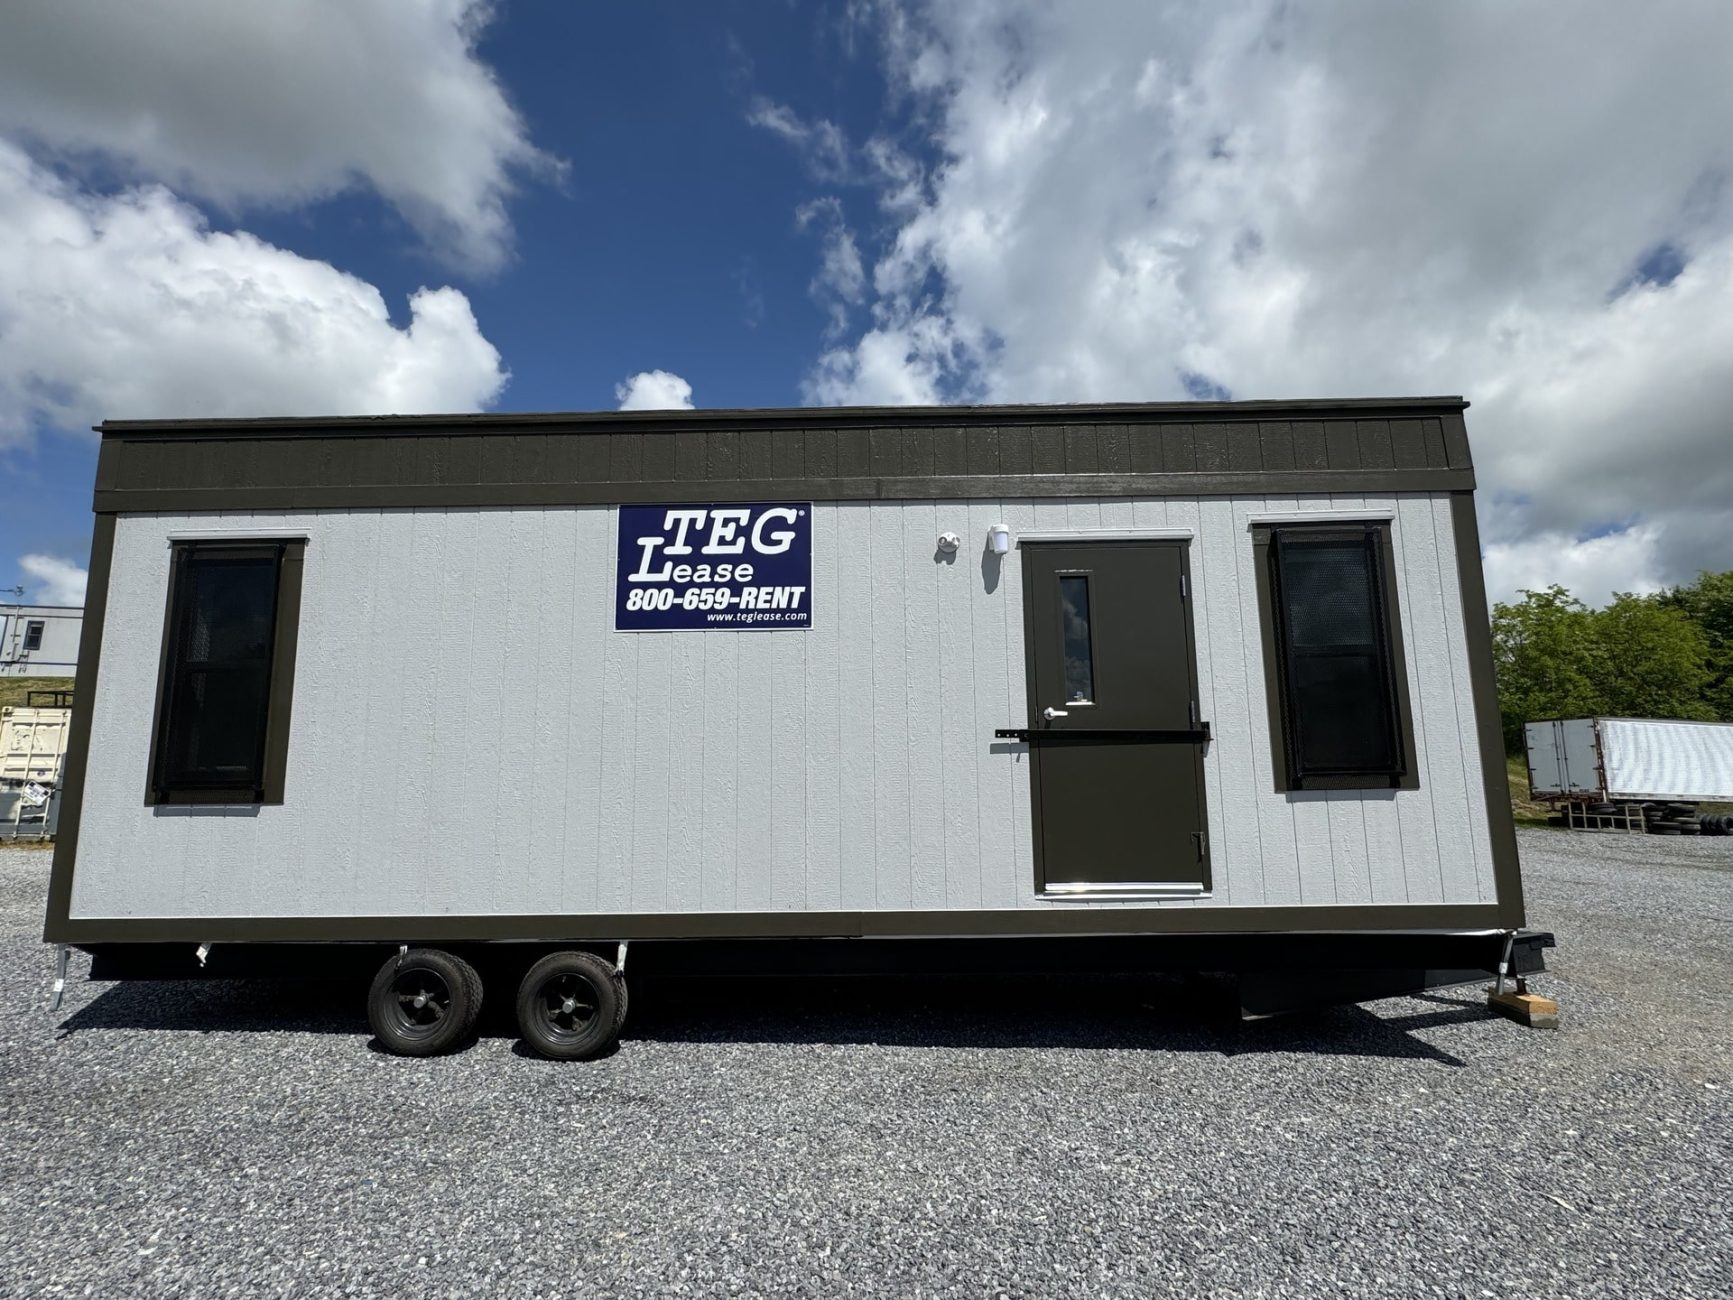 Photo #4 of Field Offices located in Clarksville, TN